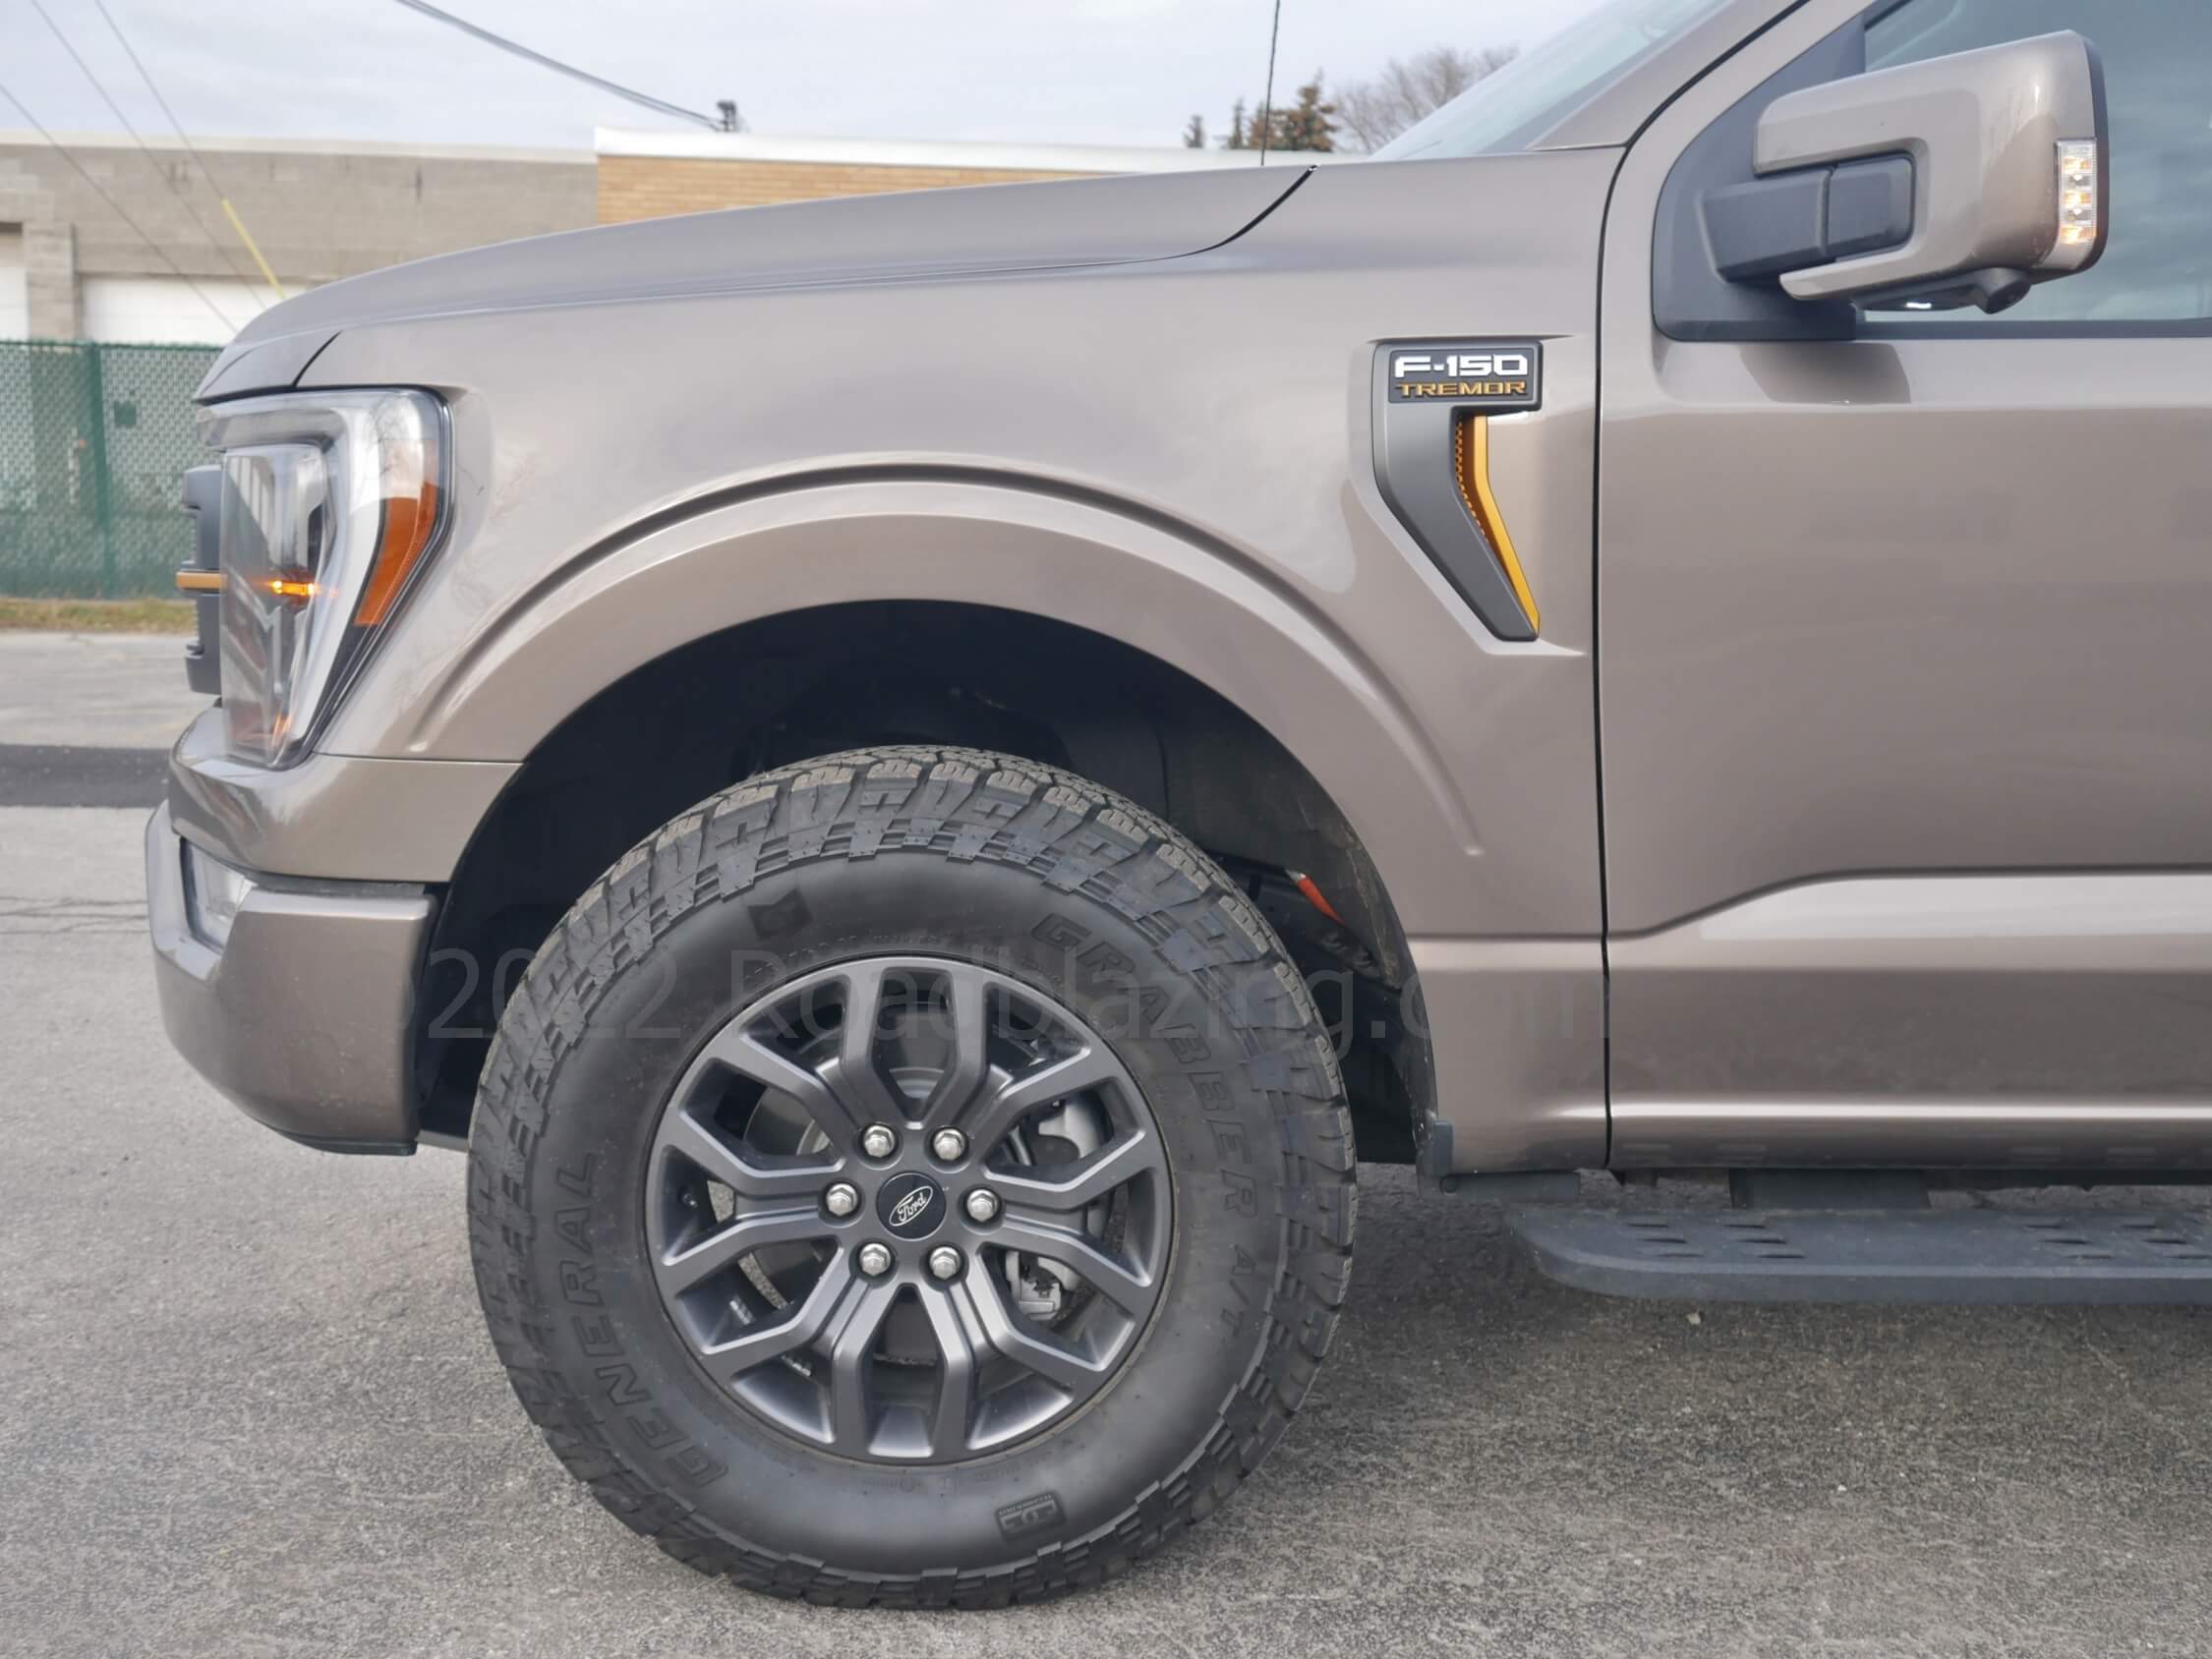 2021 Ford F-150 SuperCrew Tremor 4x4: off-road suited variable spring rates, greater suspension travel, stronger front hub knuckles and A/T tires with wider track